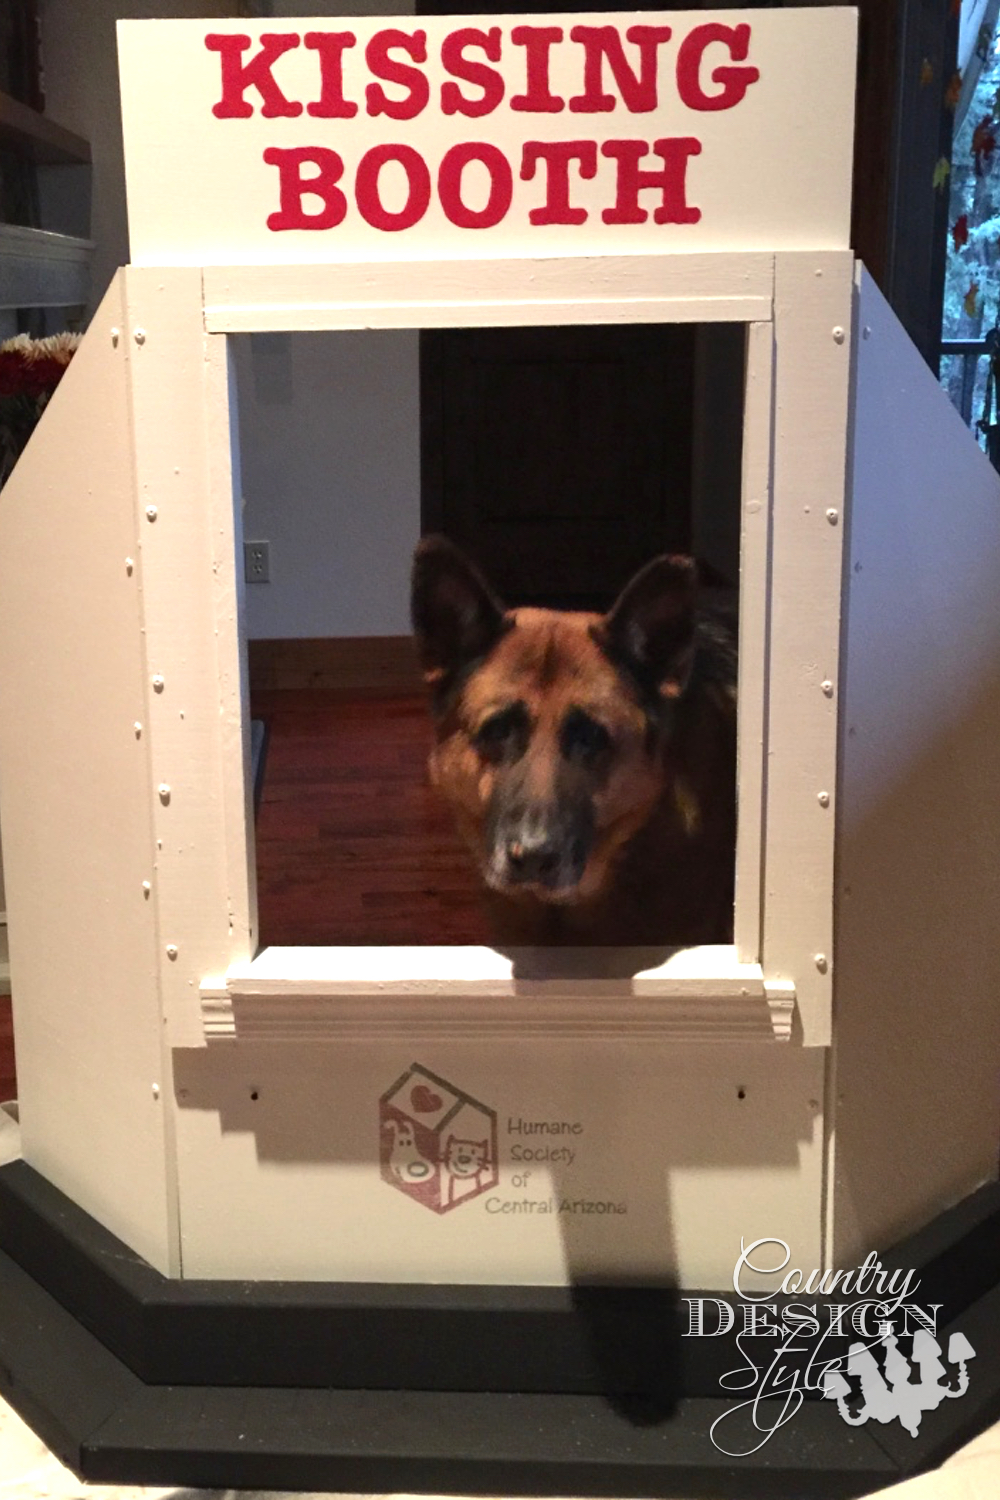 A kissing booth for dogs both small and large. Fund raising idea for sheltered animals. | countrydesignstyle.com